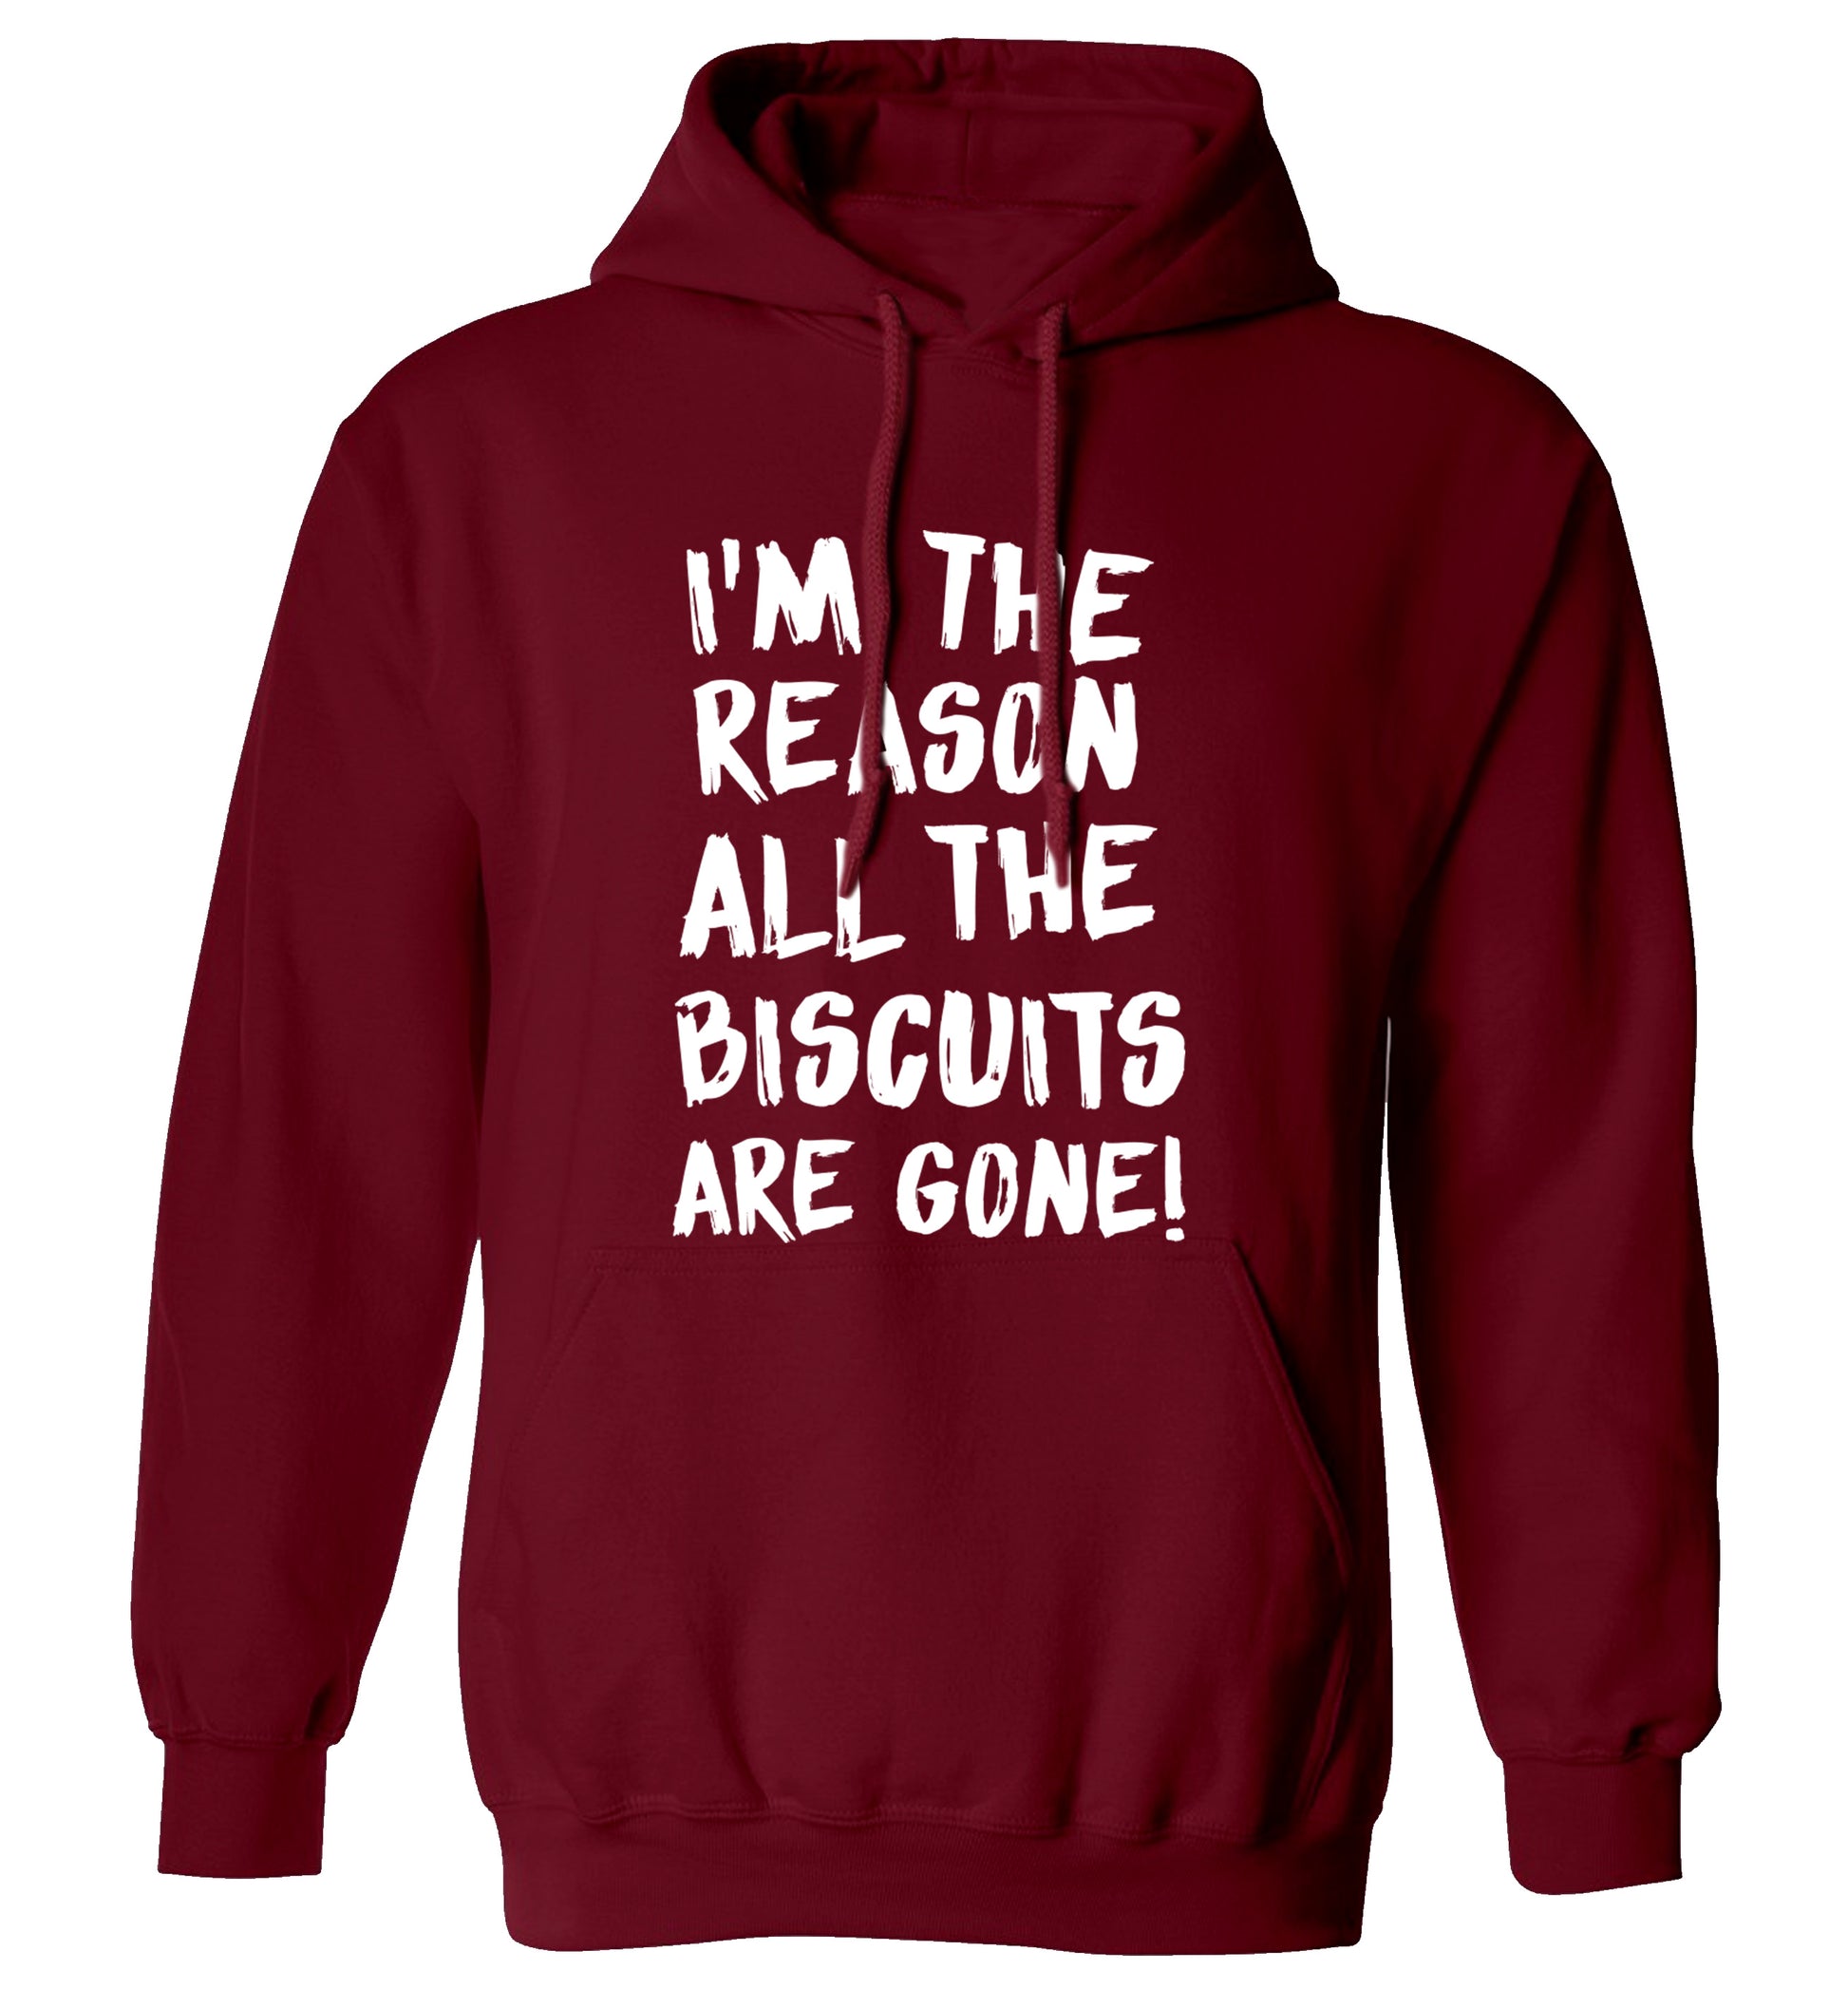 I'm the reason why all the biscuits are gone adults unisex maroon hoodie 2XL